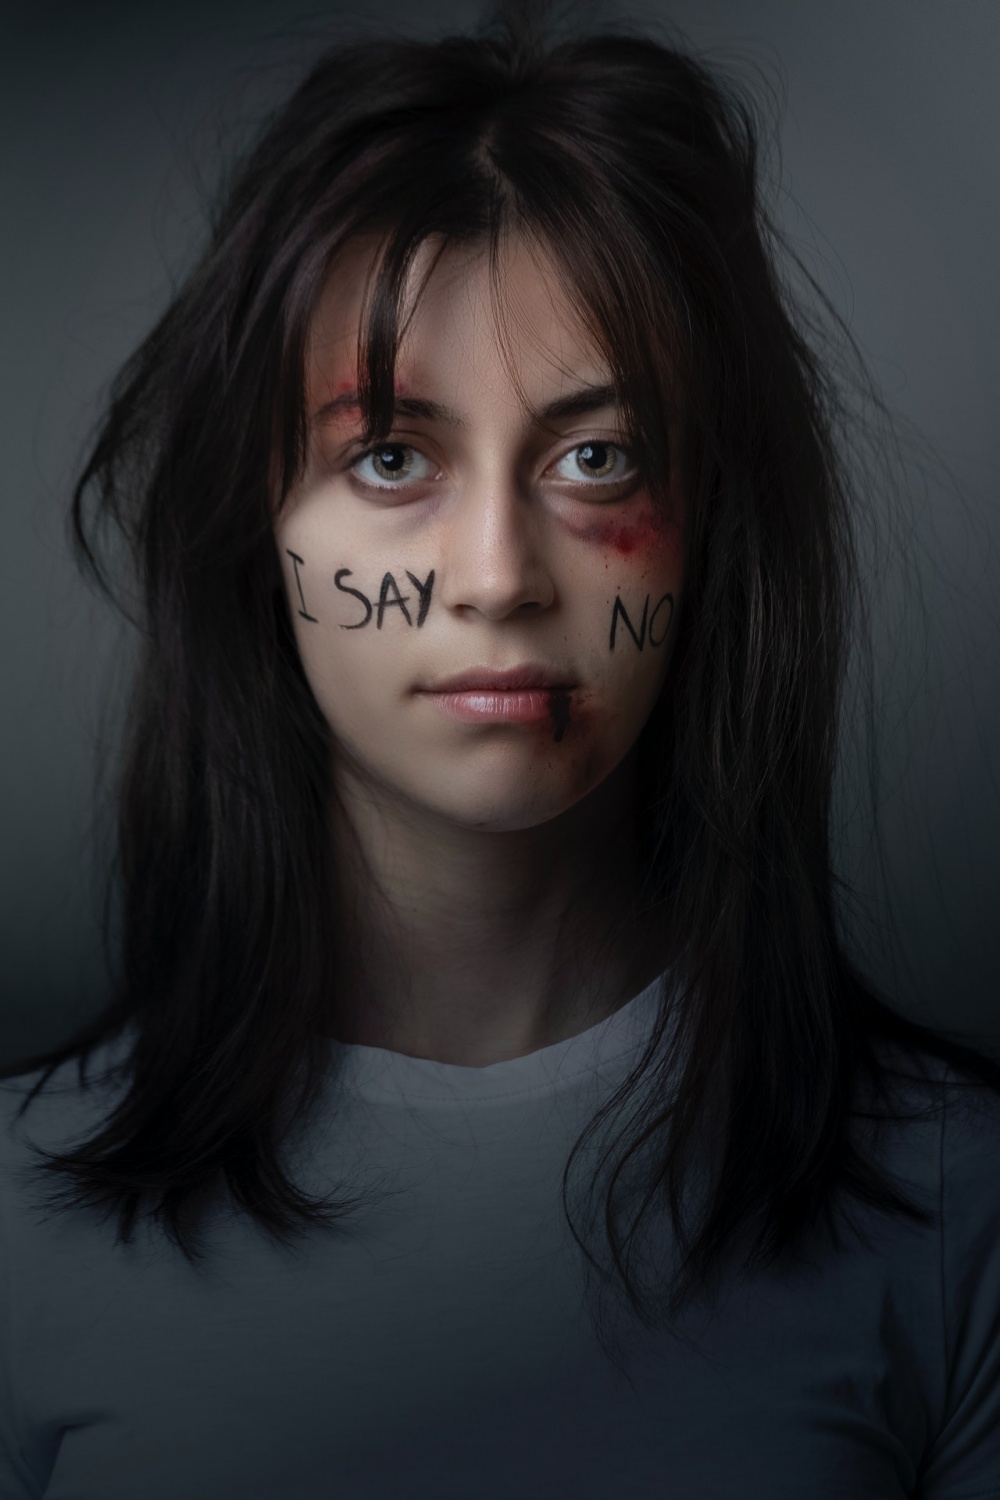 effects of domestic violence on society